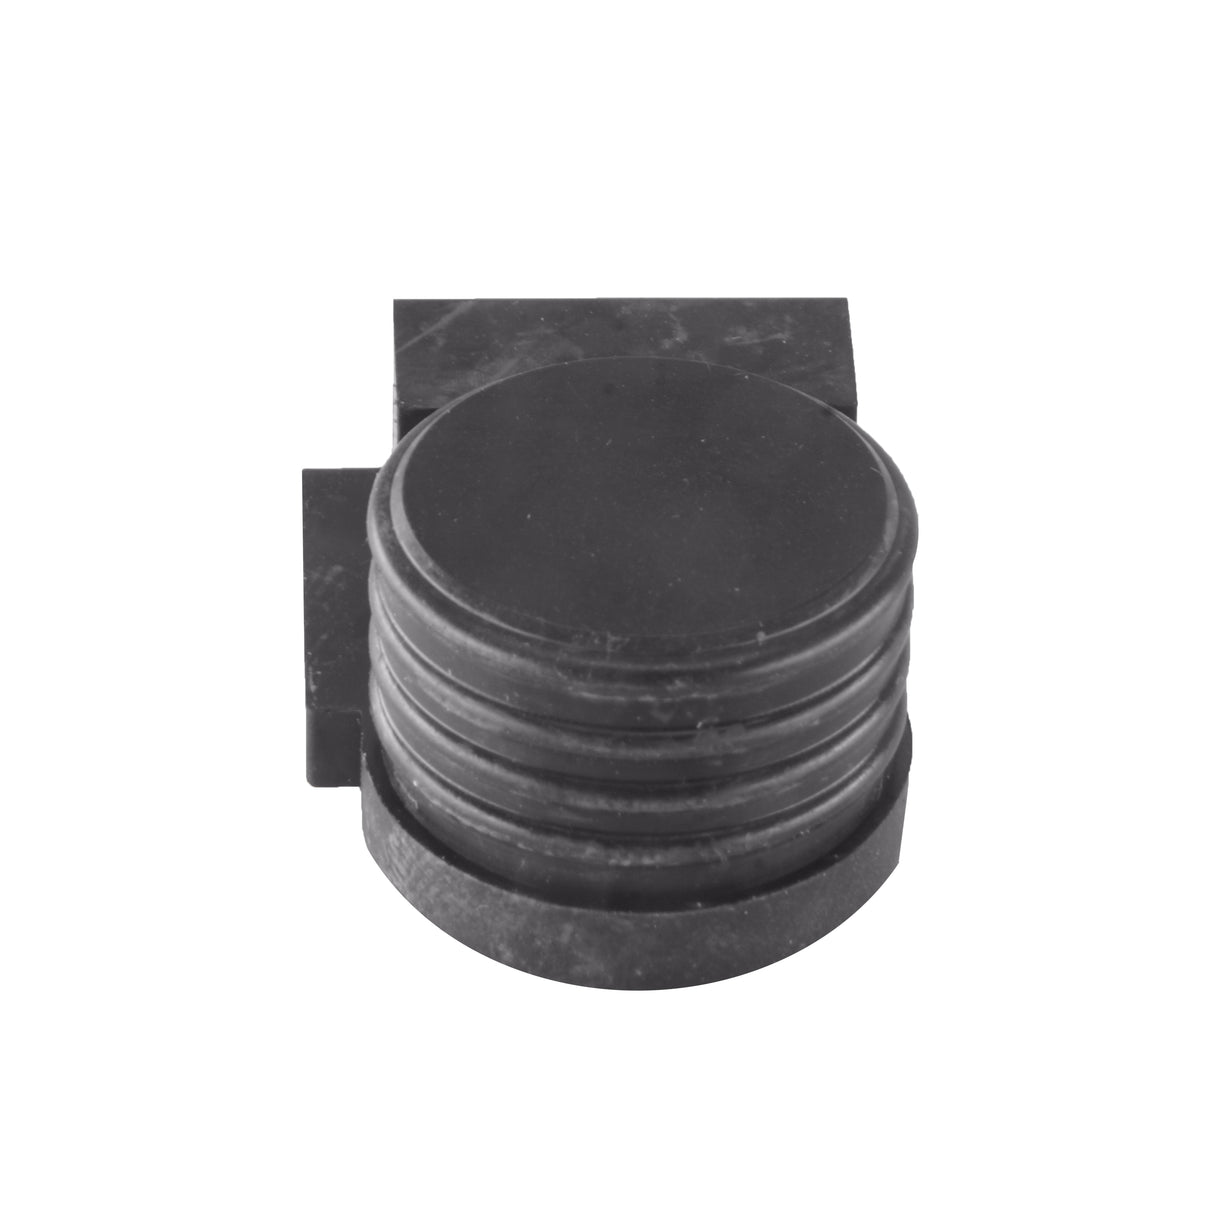 Outlet Stopper for BioStyle 30 / 50 & BioStyle Thermo 30 / 50